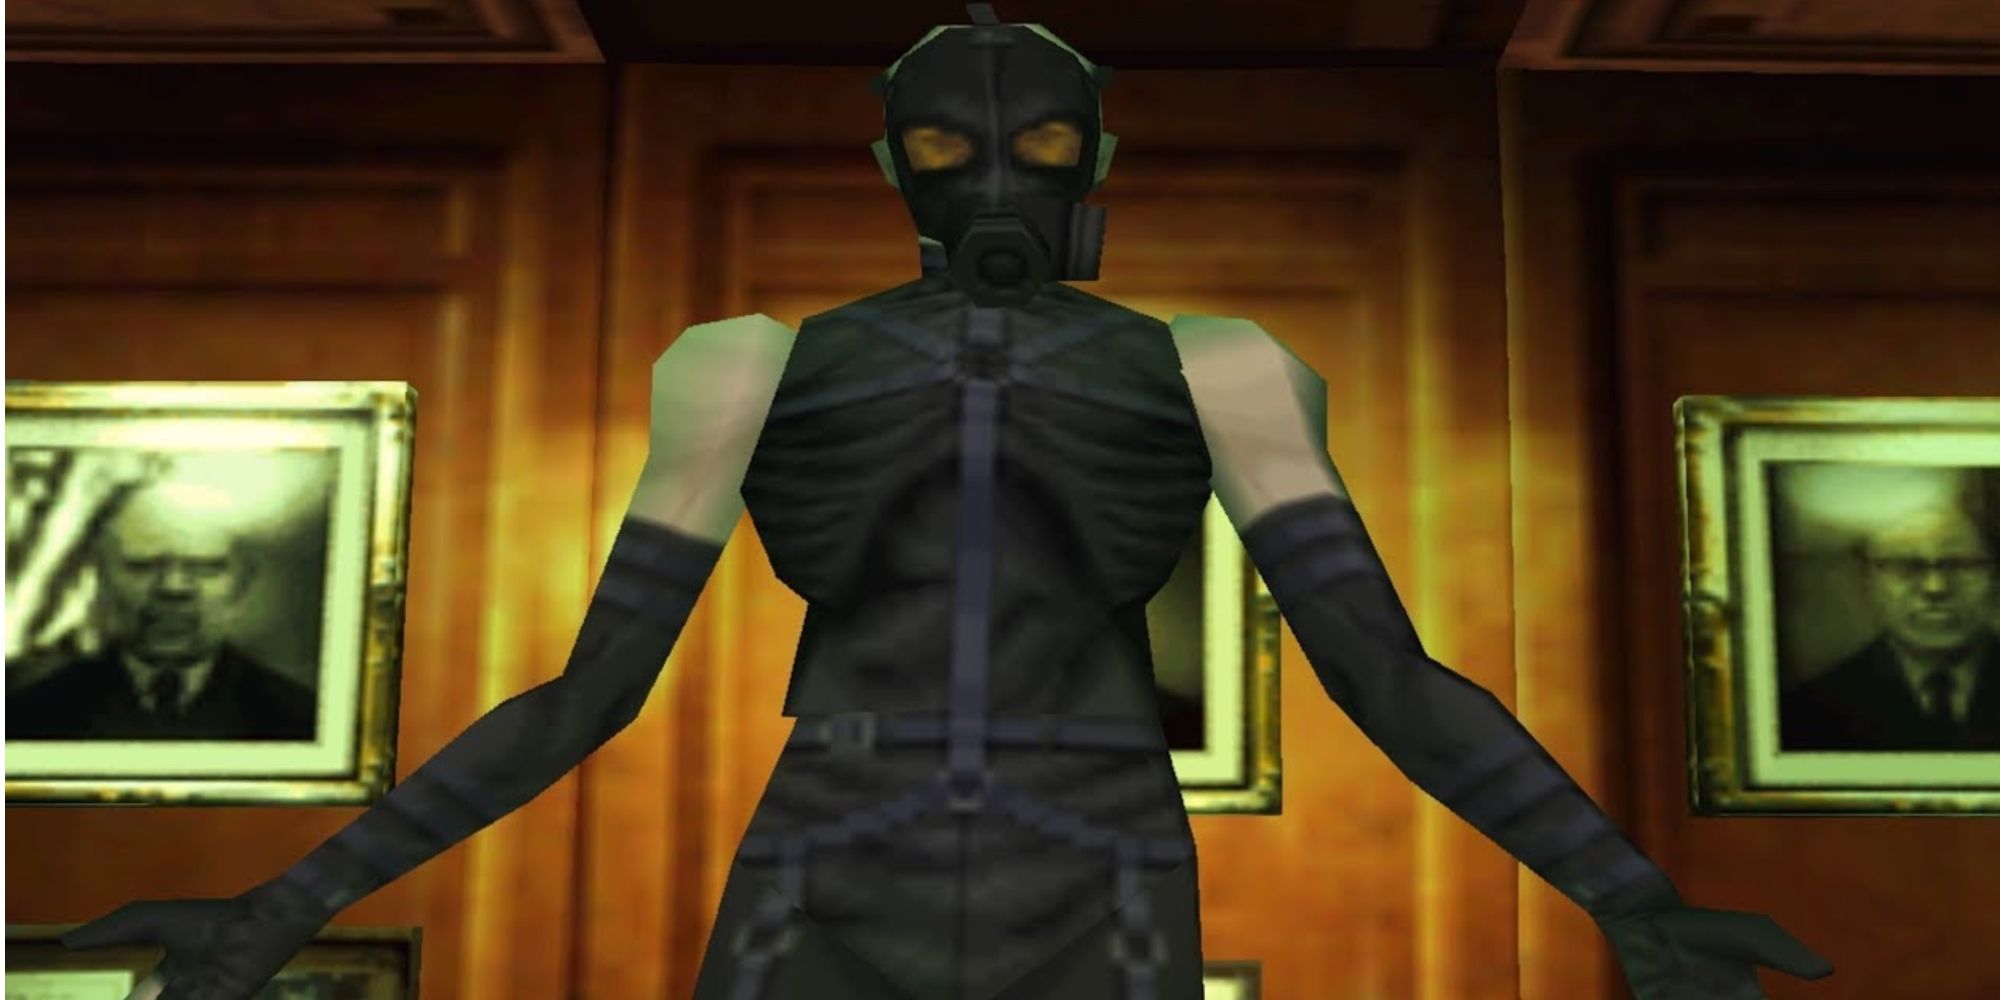 Metal Gear Solid Psycho Mantis could access player's save files, even from other games